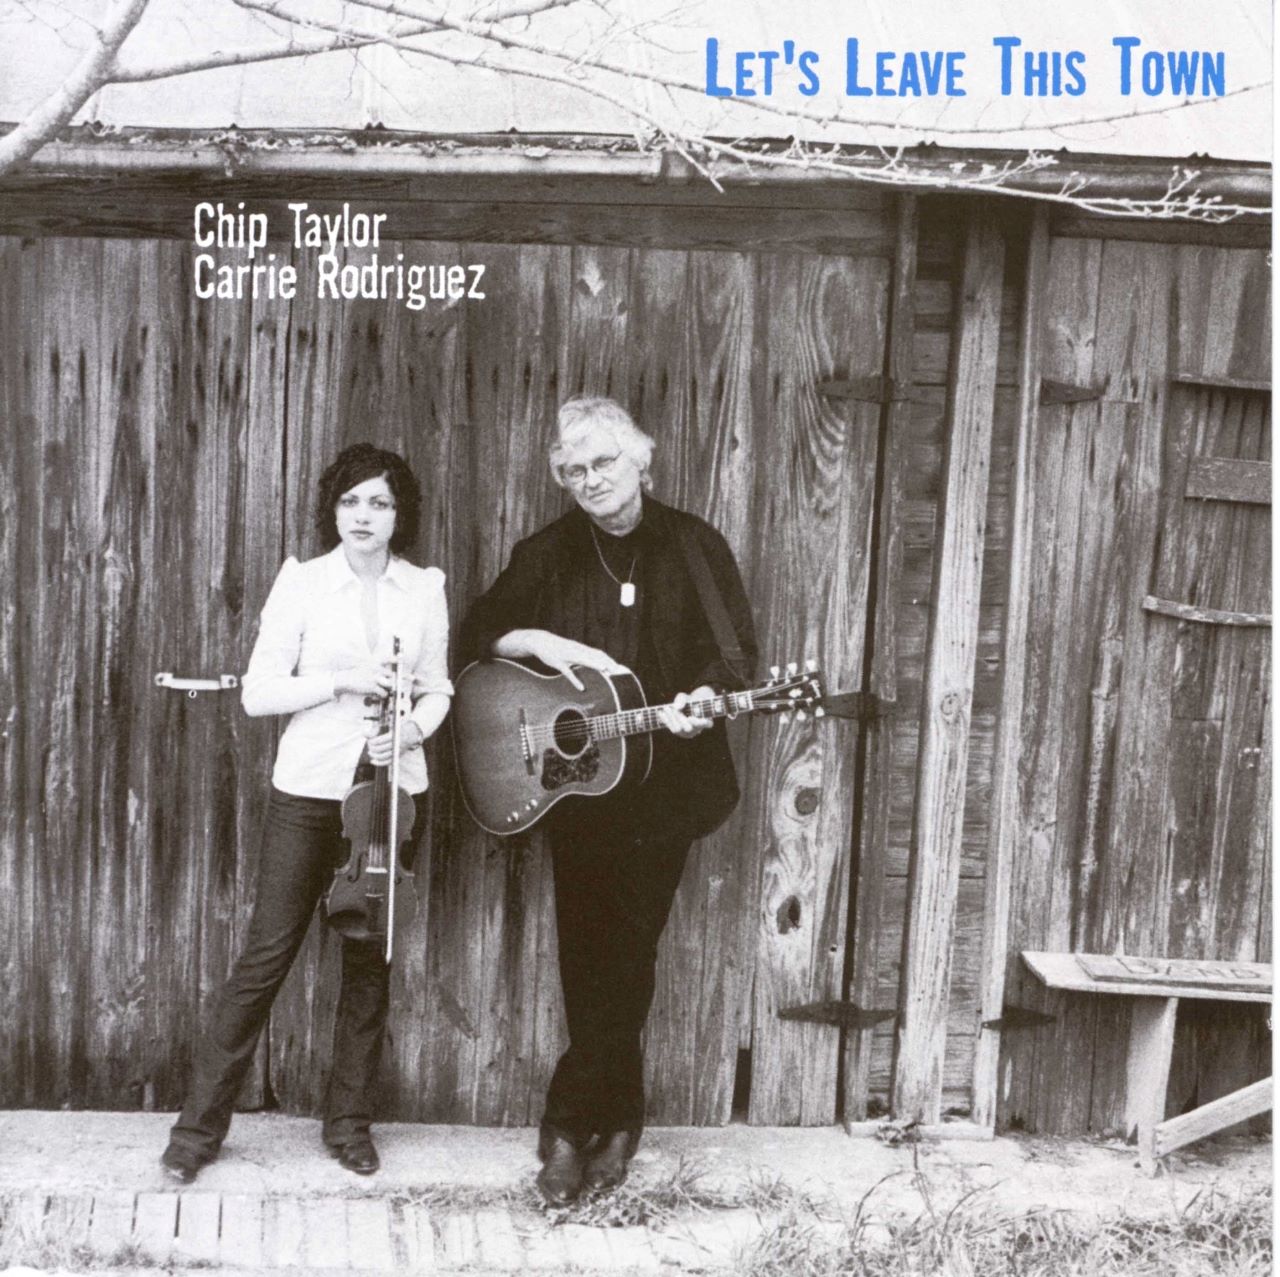 Chip Taylor & Carrie Rodriguez - Let's Leave This Town cover album